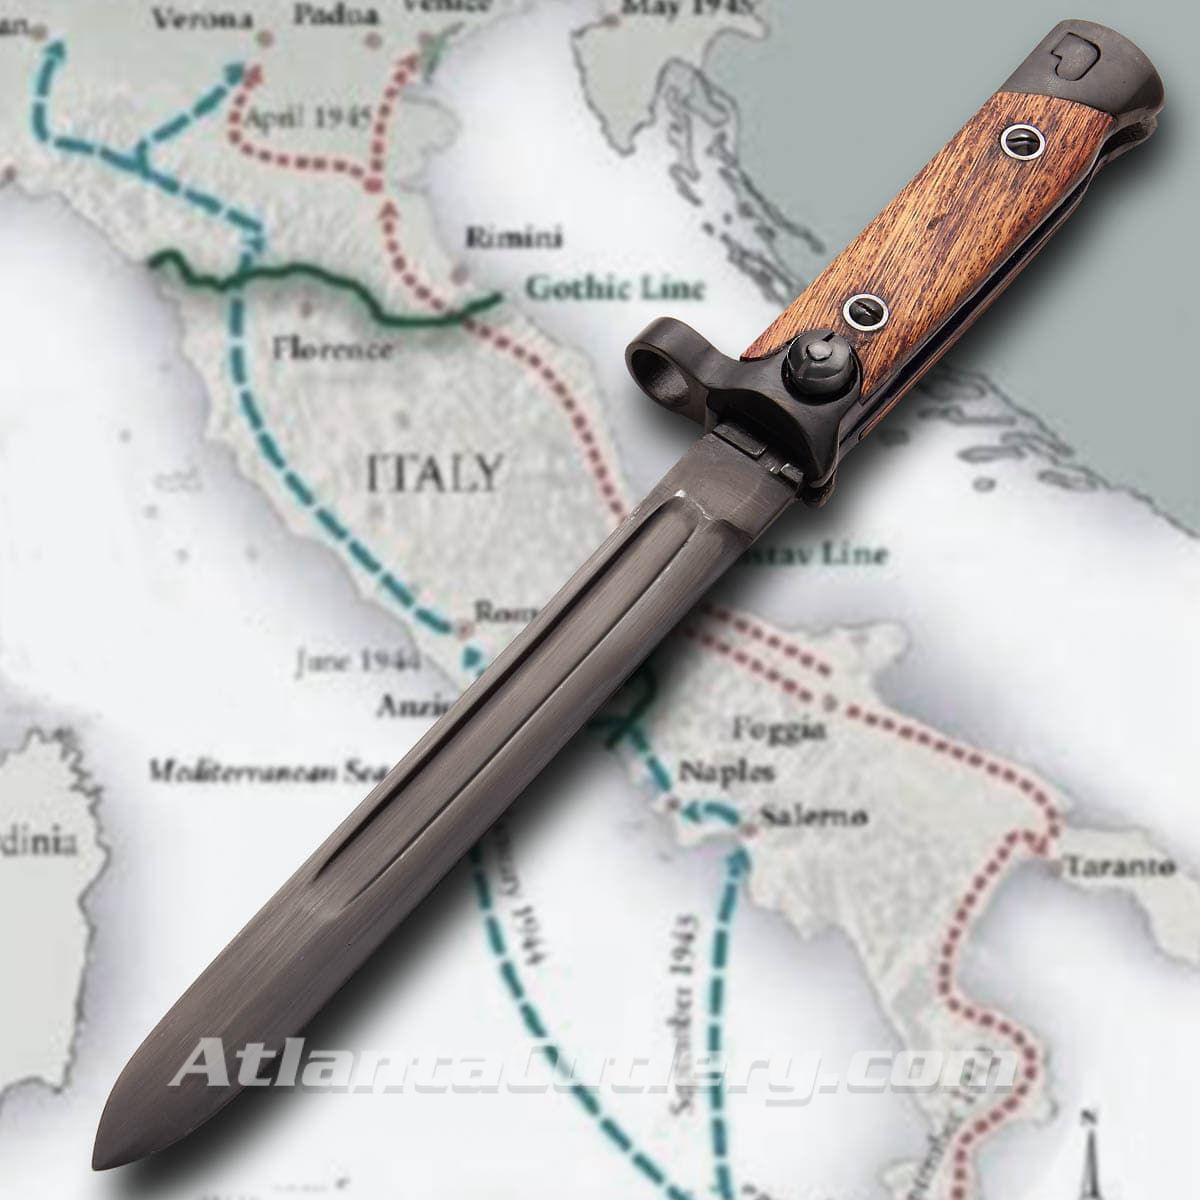 Italian Carcano folding bayonet functional WWII replica with metal sheath, wood grips and high carbon steel blade